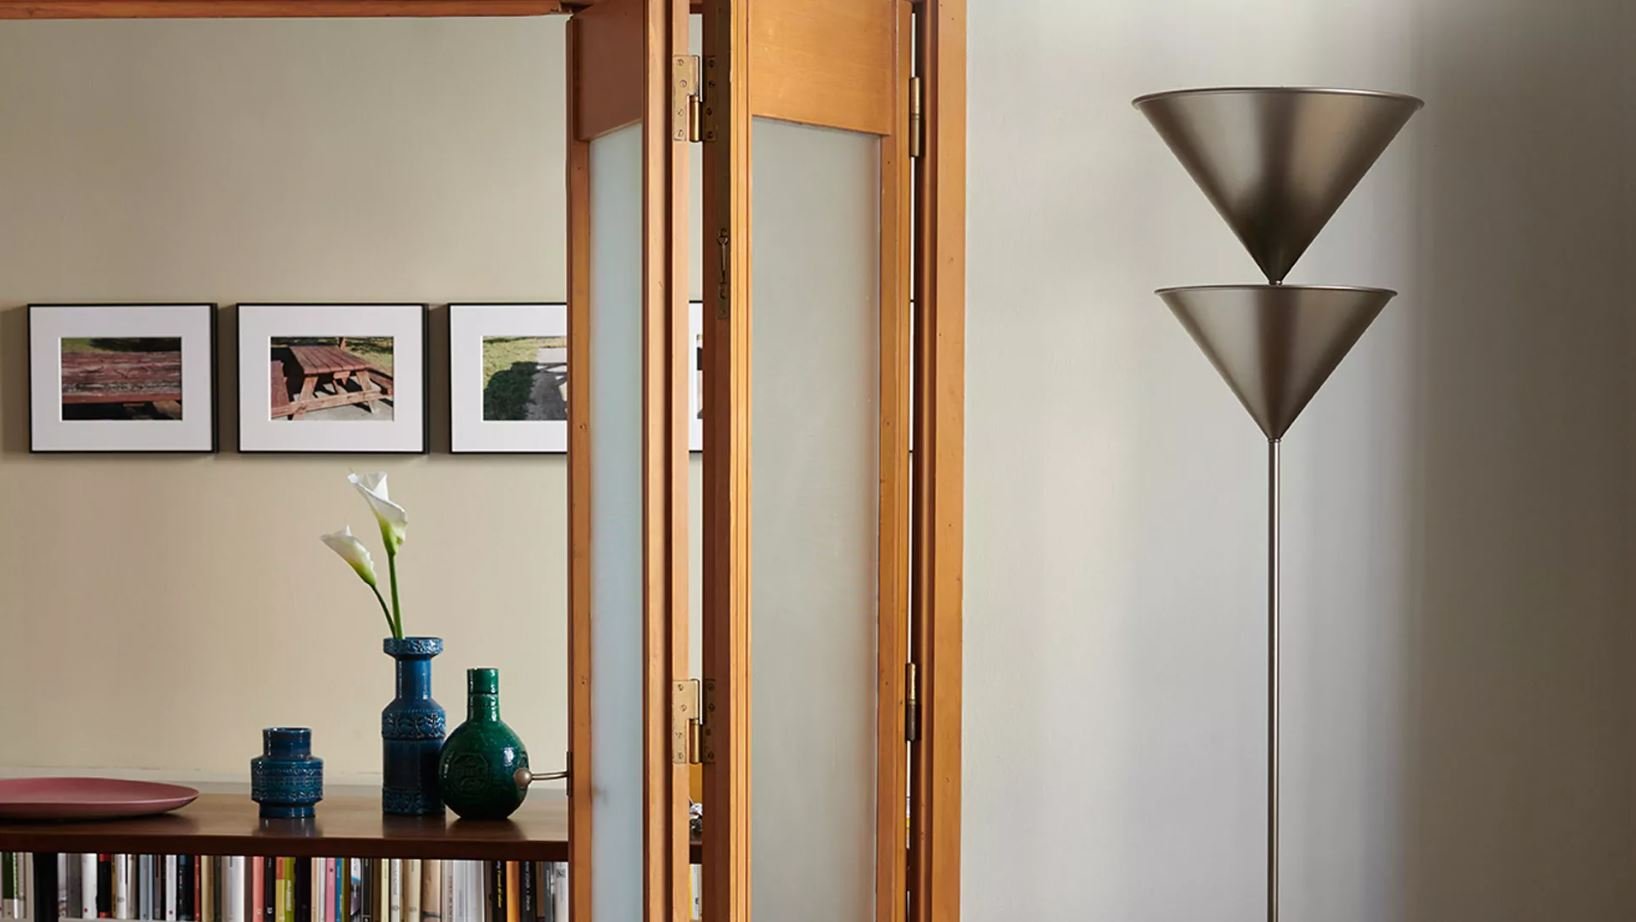 Pascal Floor Lamp lighting from Oluce, designed by Vico Magistretti